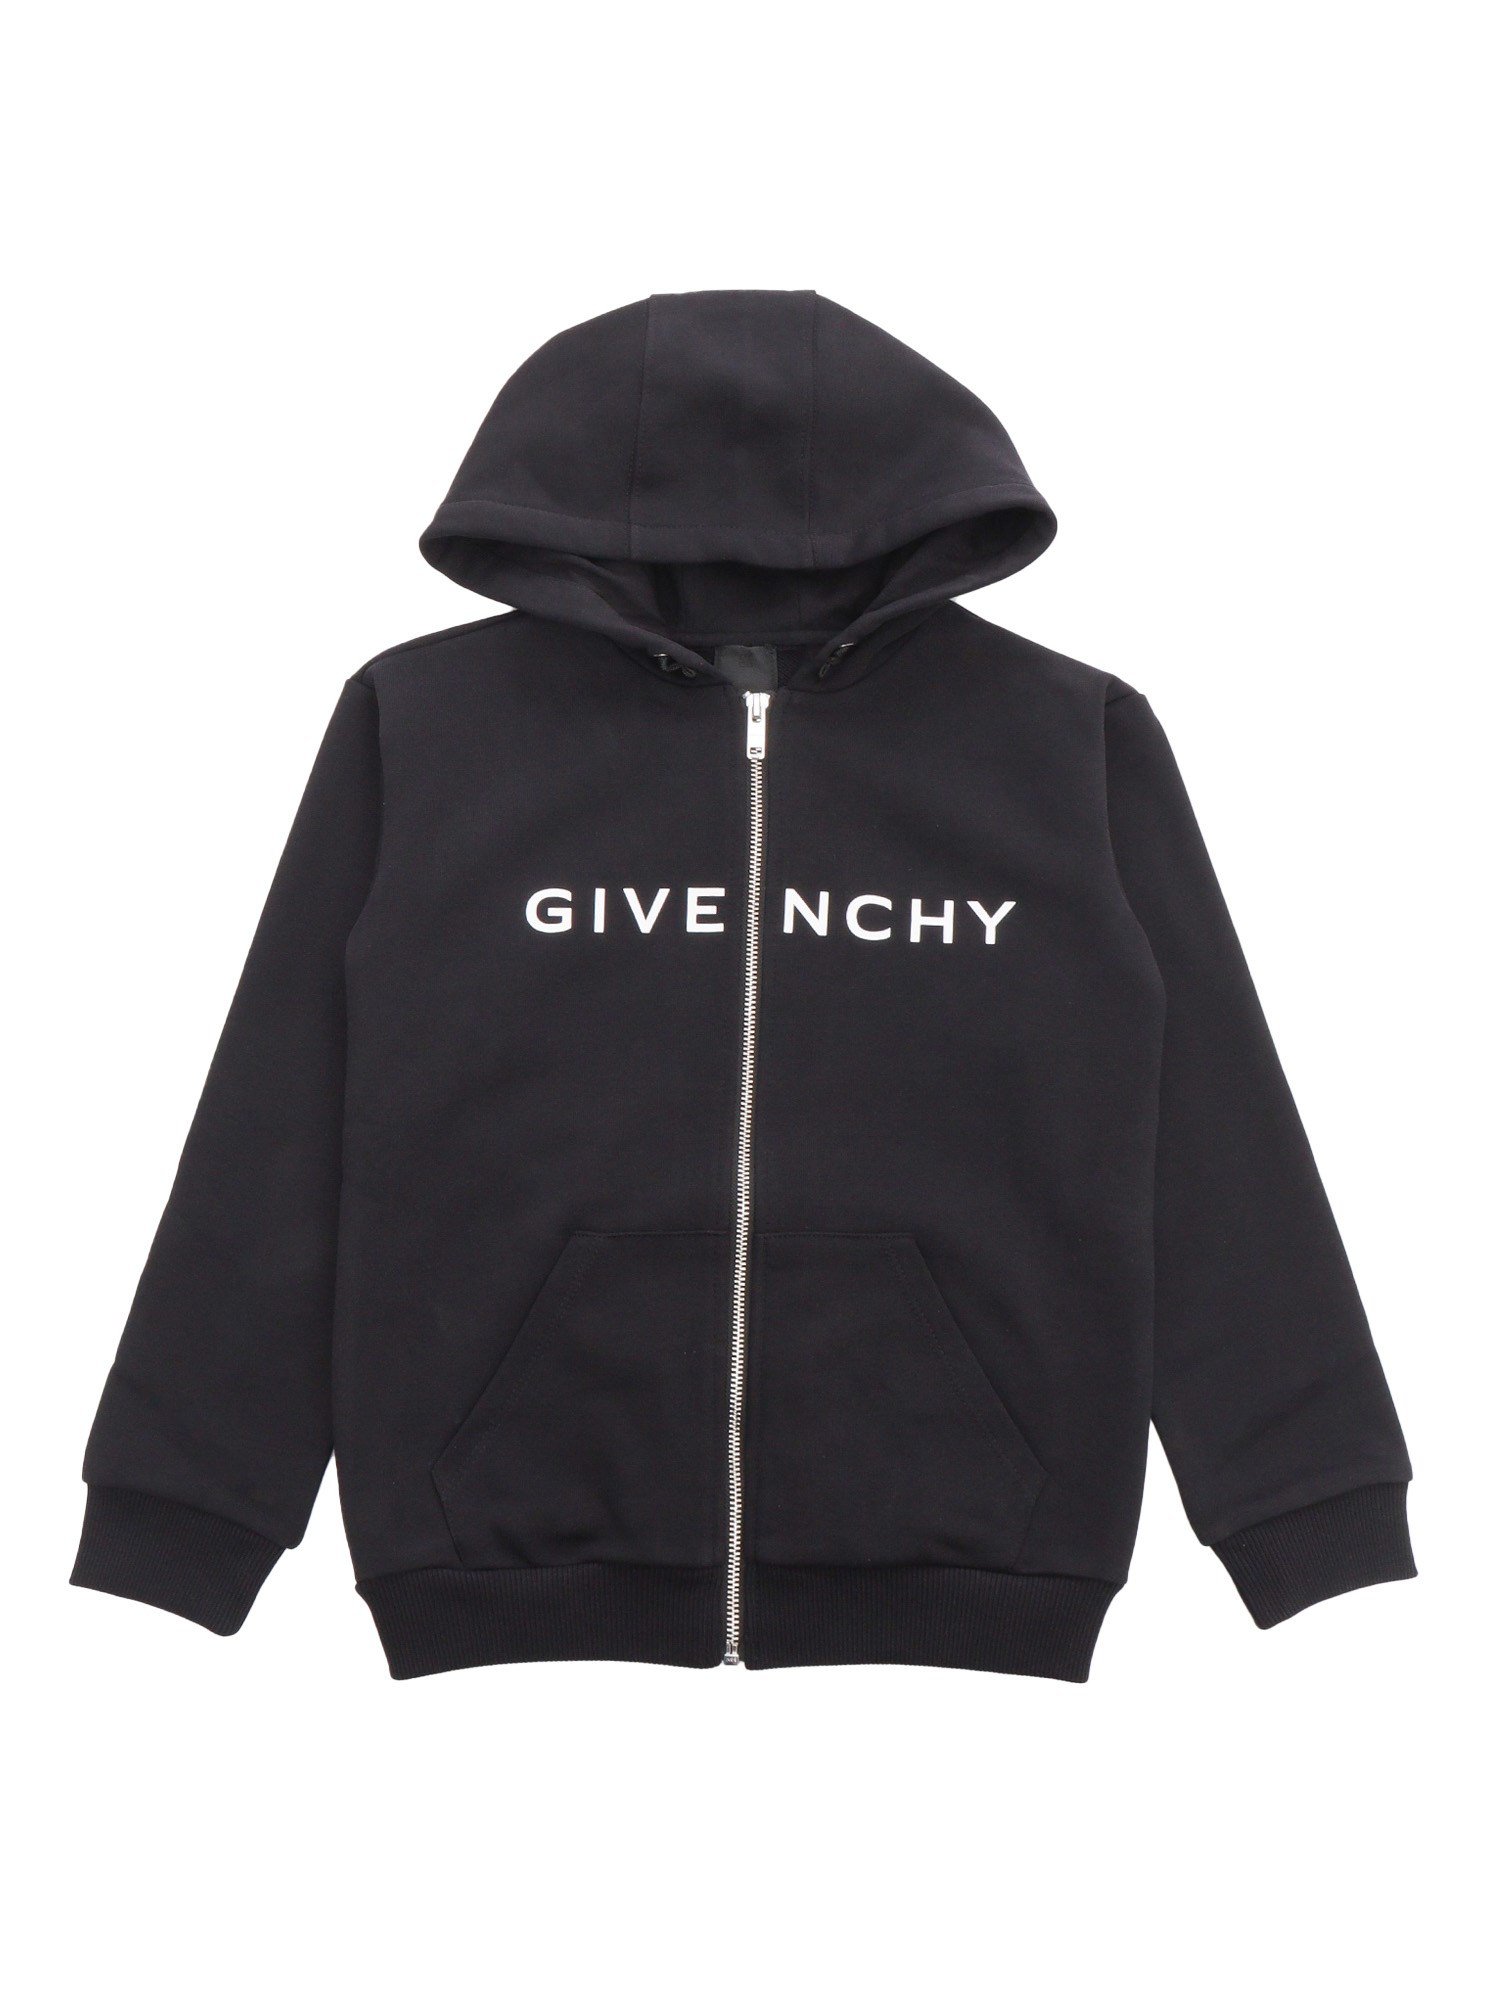 Givenchy Black Hooded